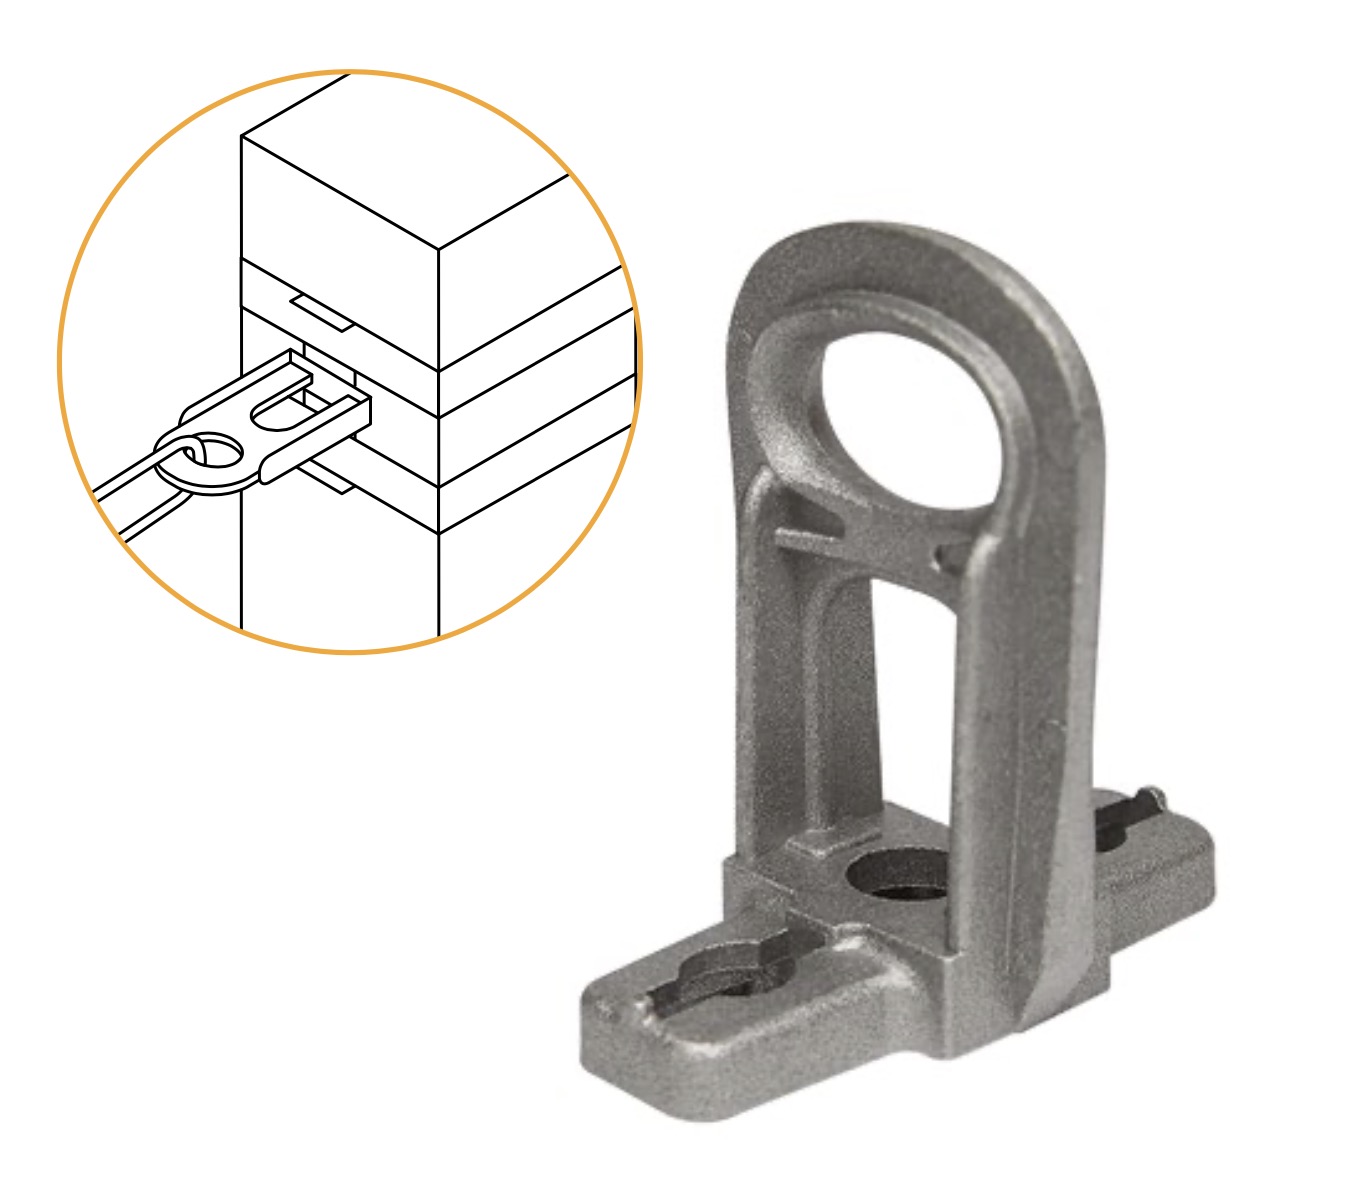 ABC Cable Anchor Suspension clamp bracket